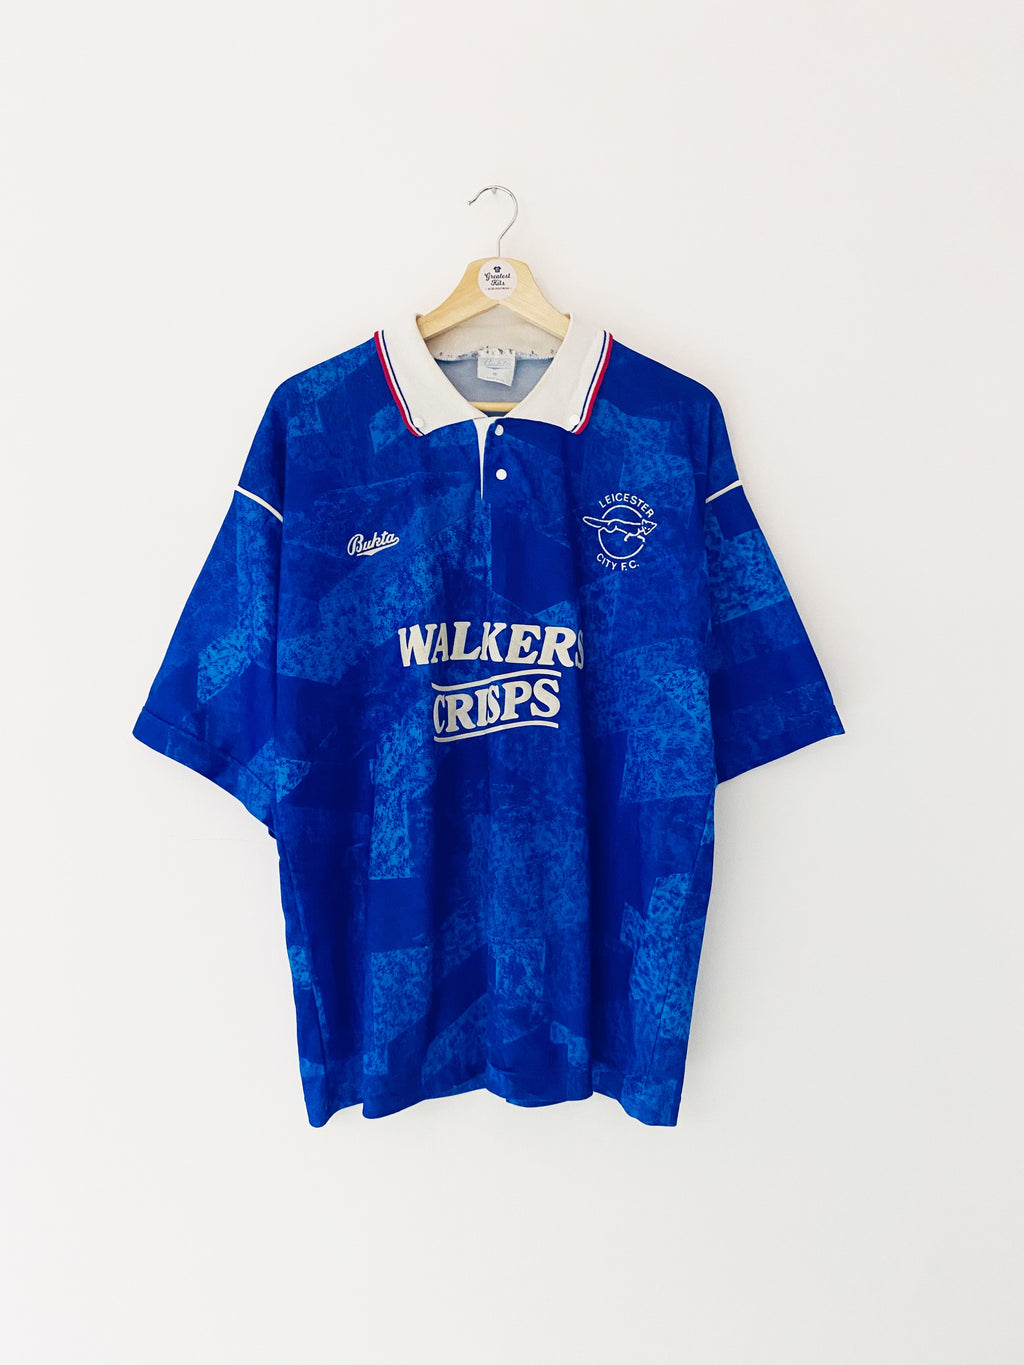 1990/92 Leicester Home Shirt (L) 7.5/10